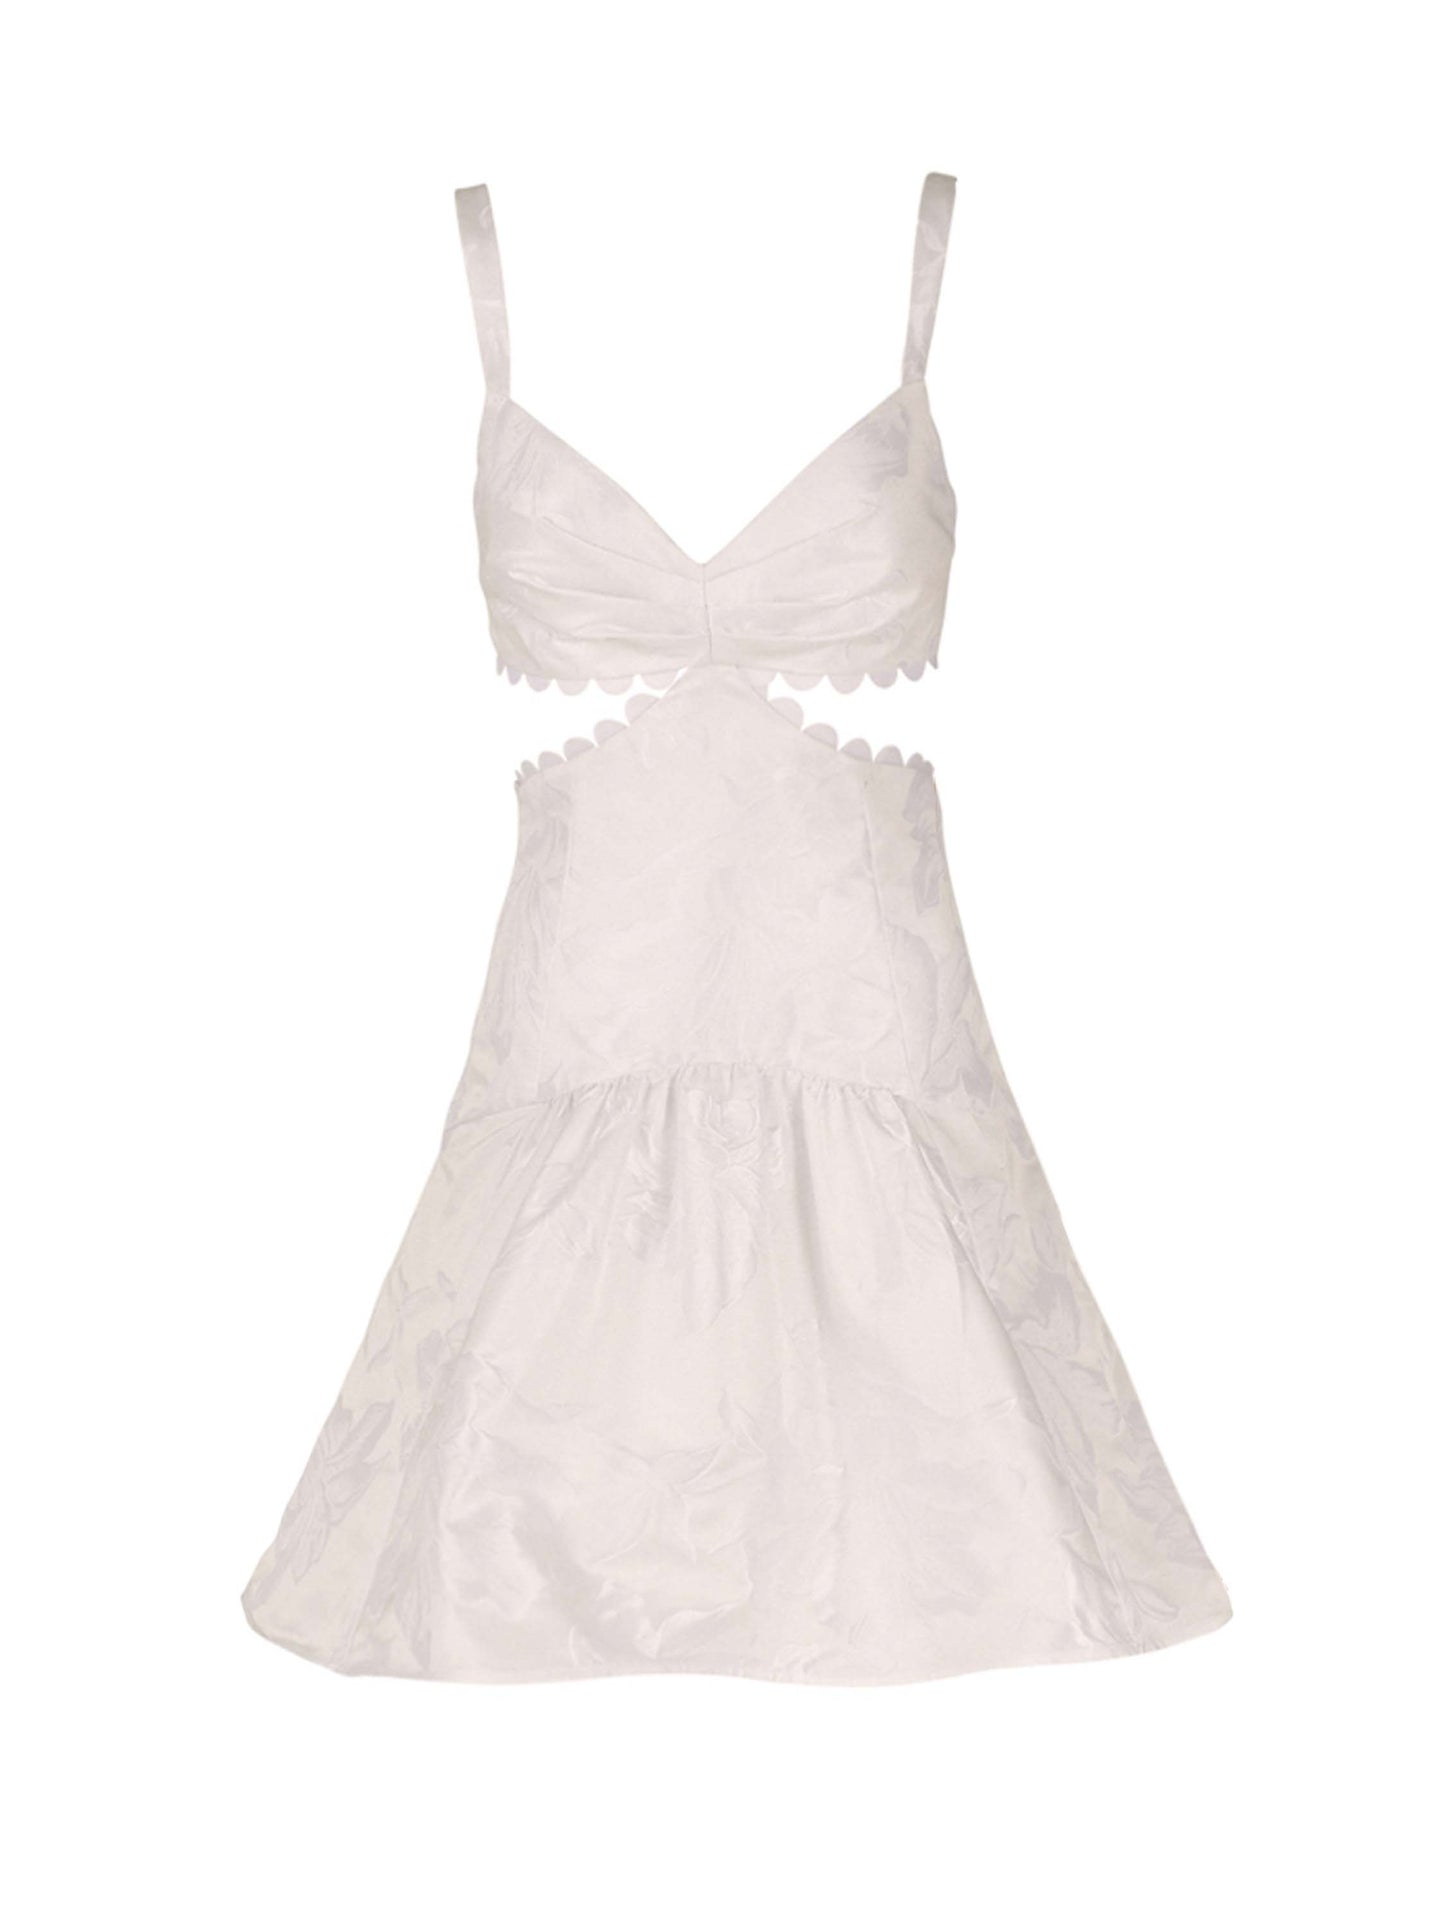 Thalia Dress White with thin straps and scalloped detailing on the bra top, isolated on a white background.